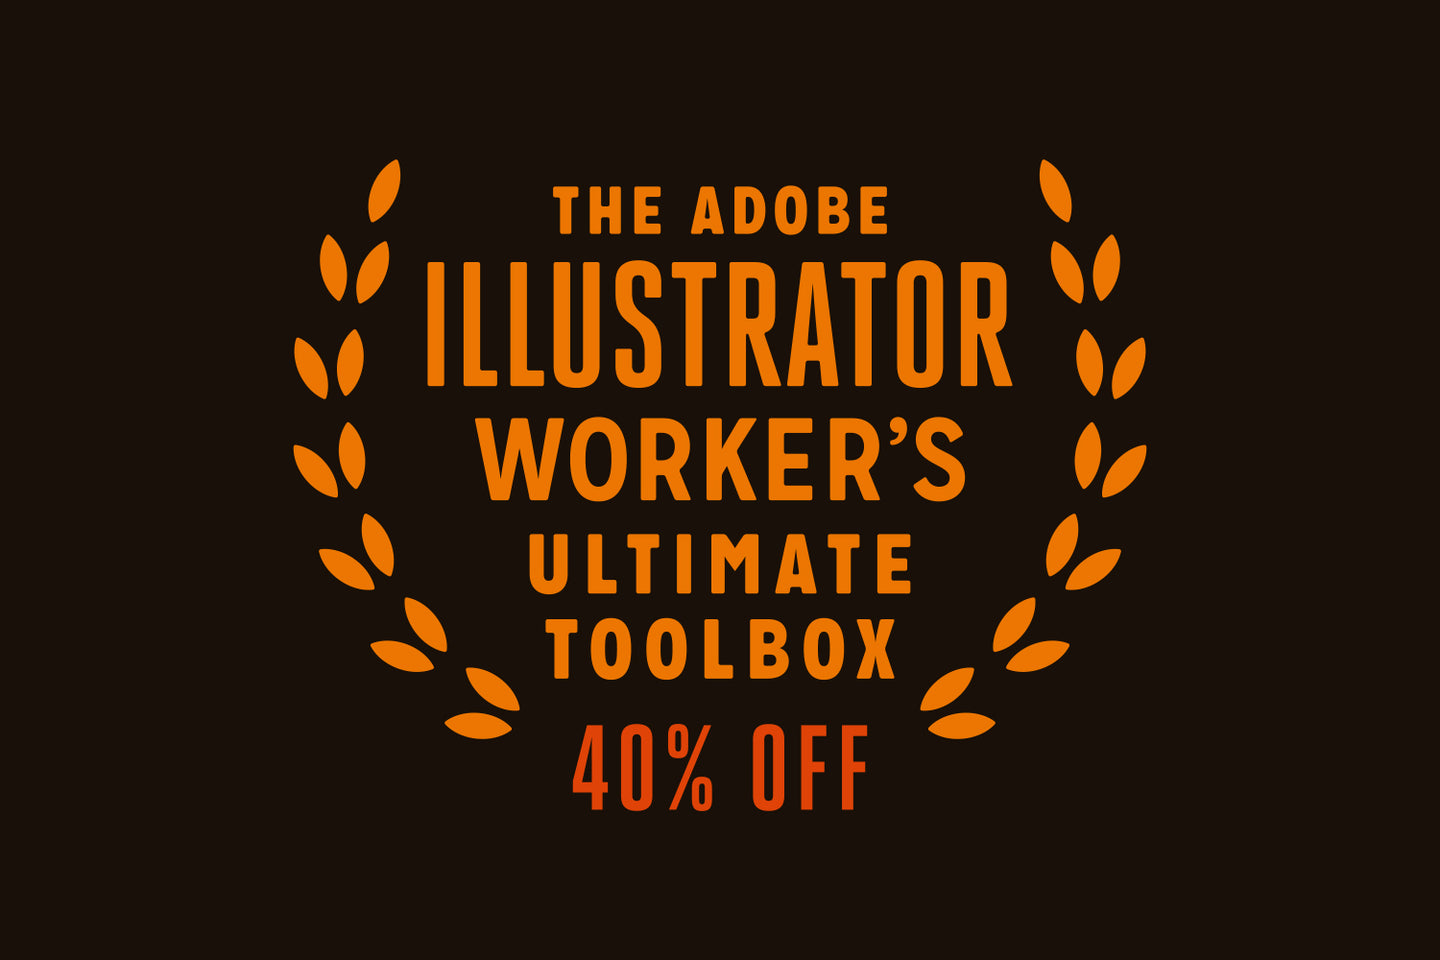 The Illustrator Worker's Ultimate Toolbox